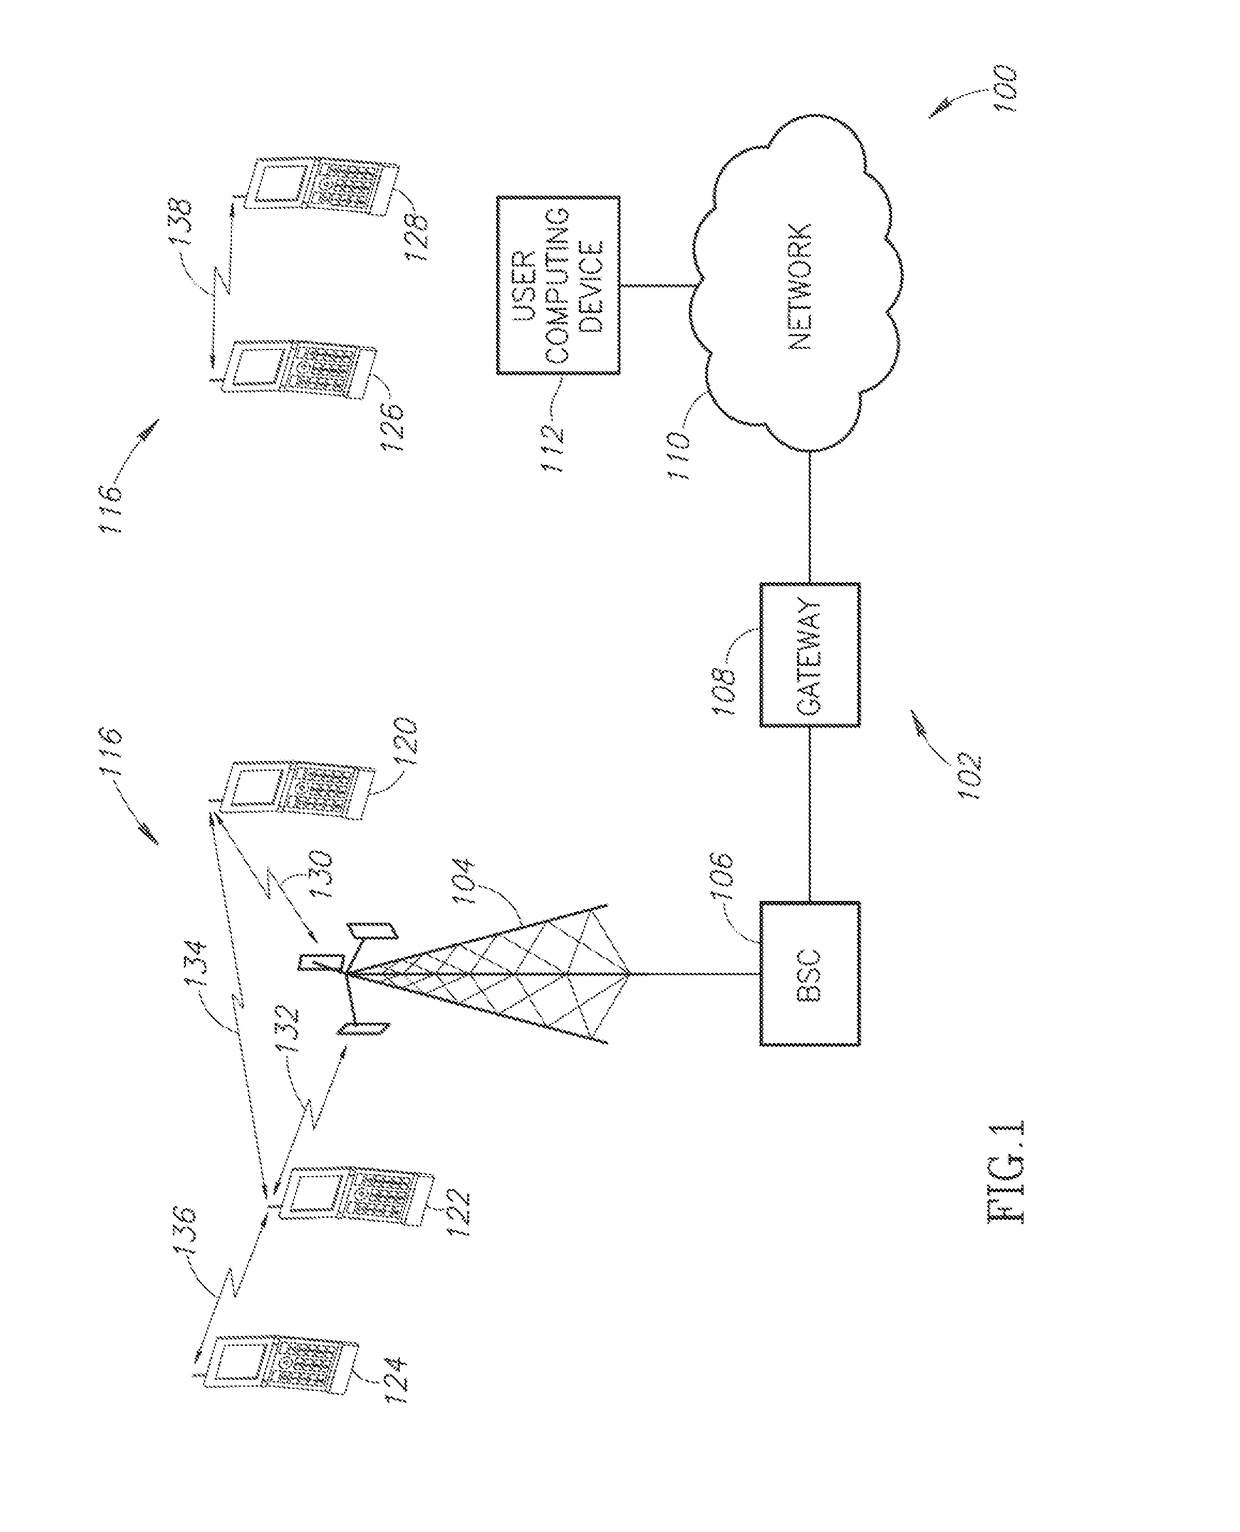 System and method for wireless communication in an educational setting